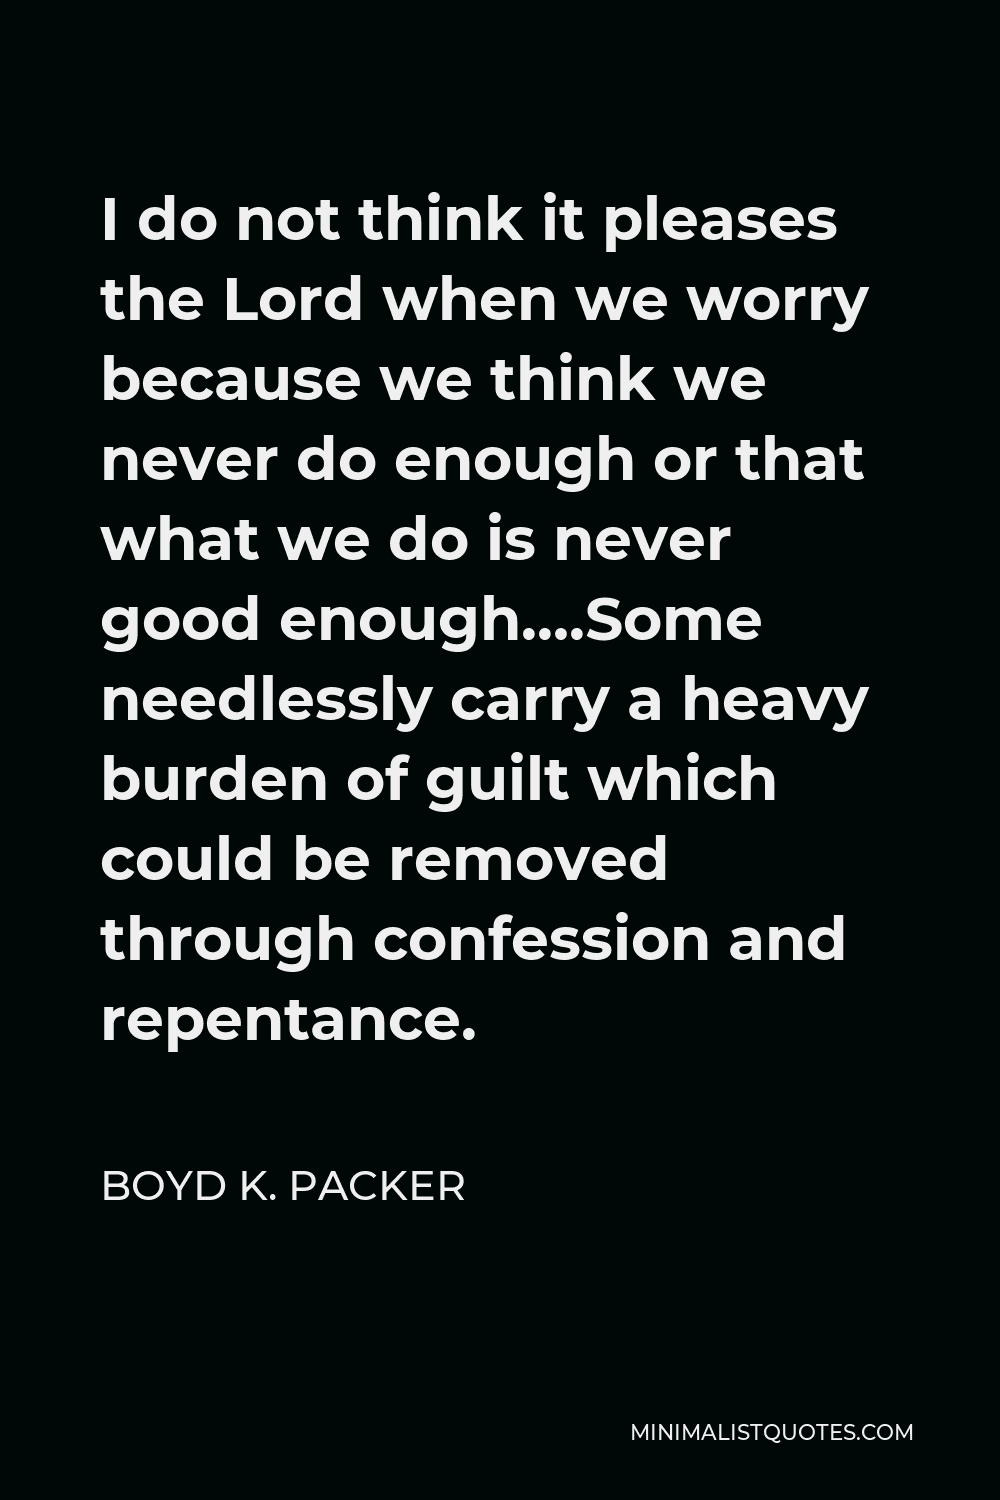 Boyd K. Packer Quote - I do not think it pleases the Lord when we worry because we think we never do enough or that what we do is never good enough….Some needlessly carry a heavy burden of guilt which could be removed through confession and repentance.